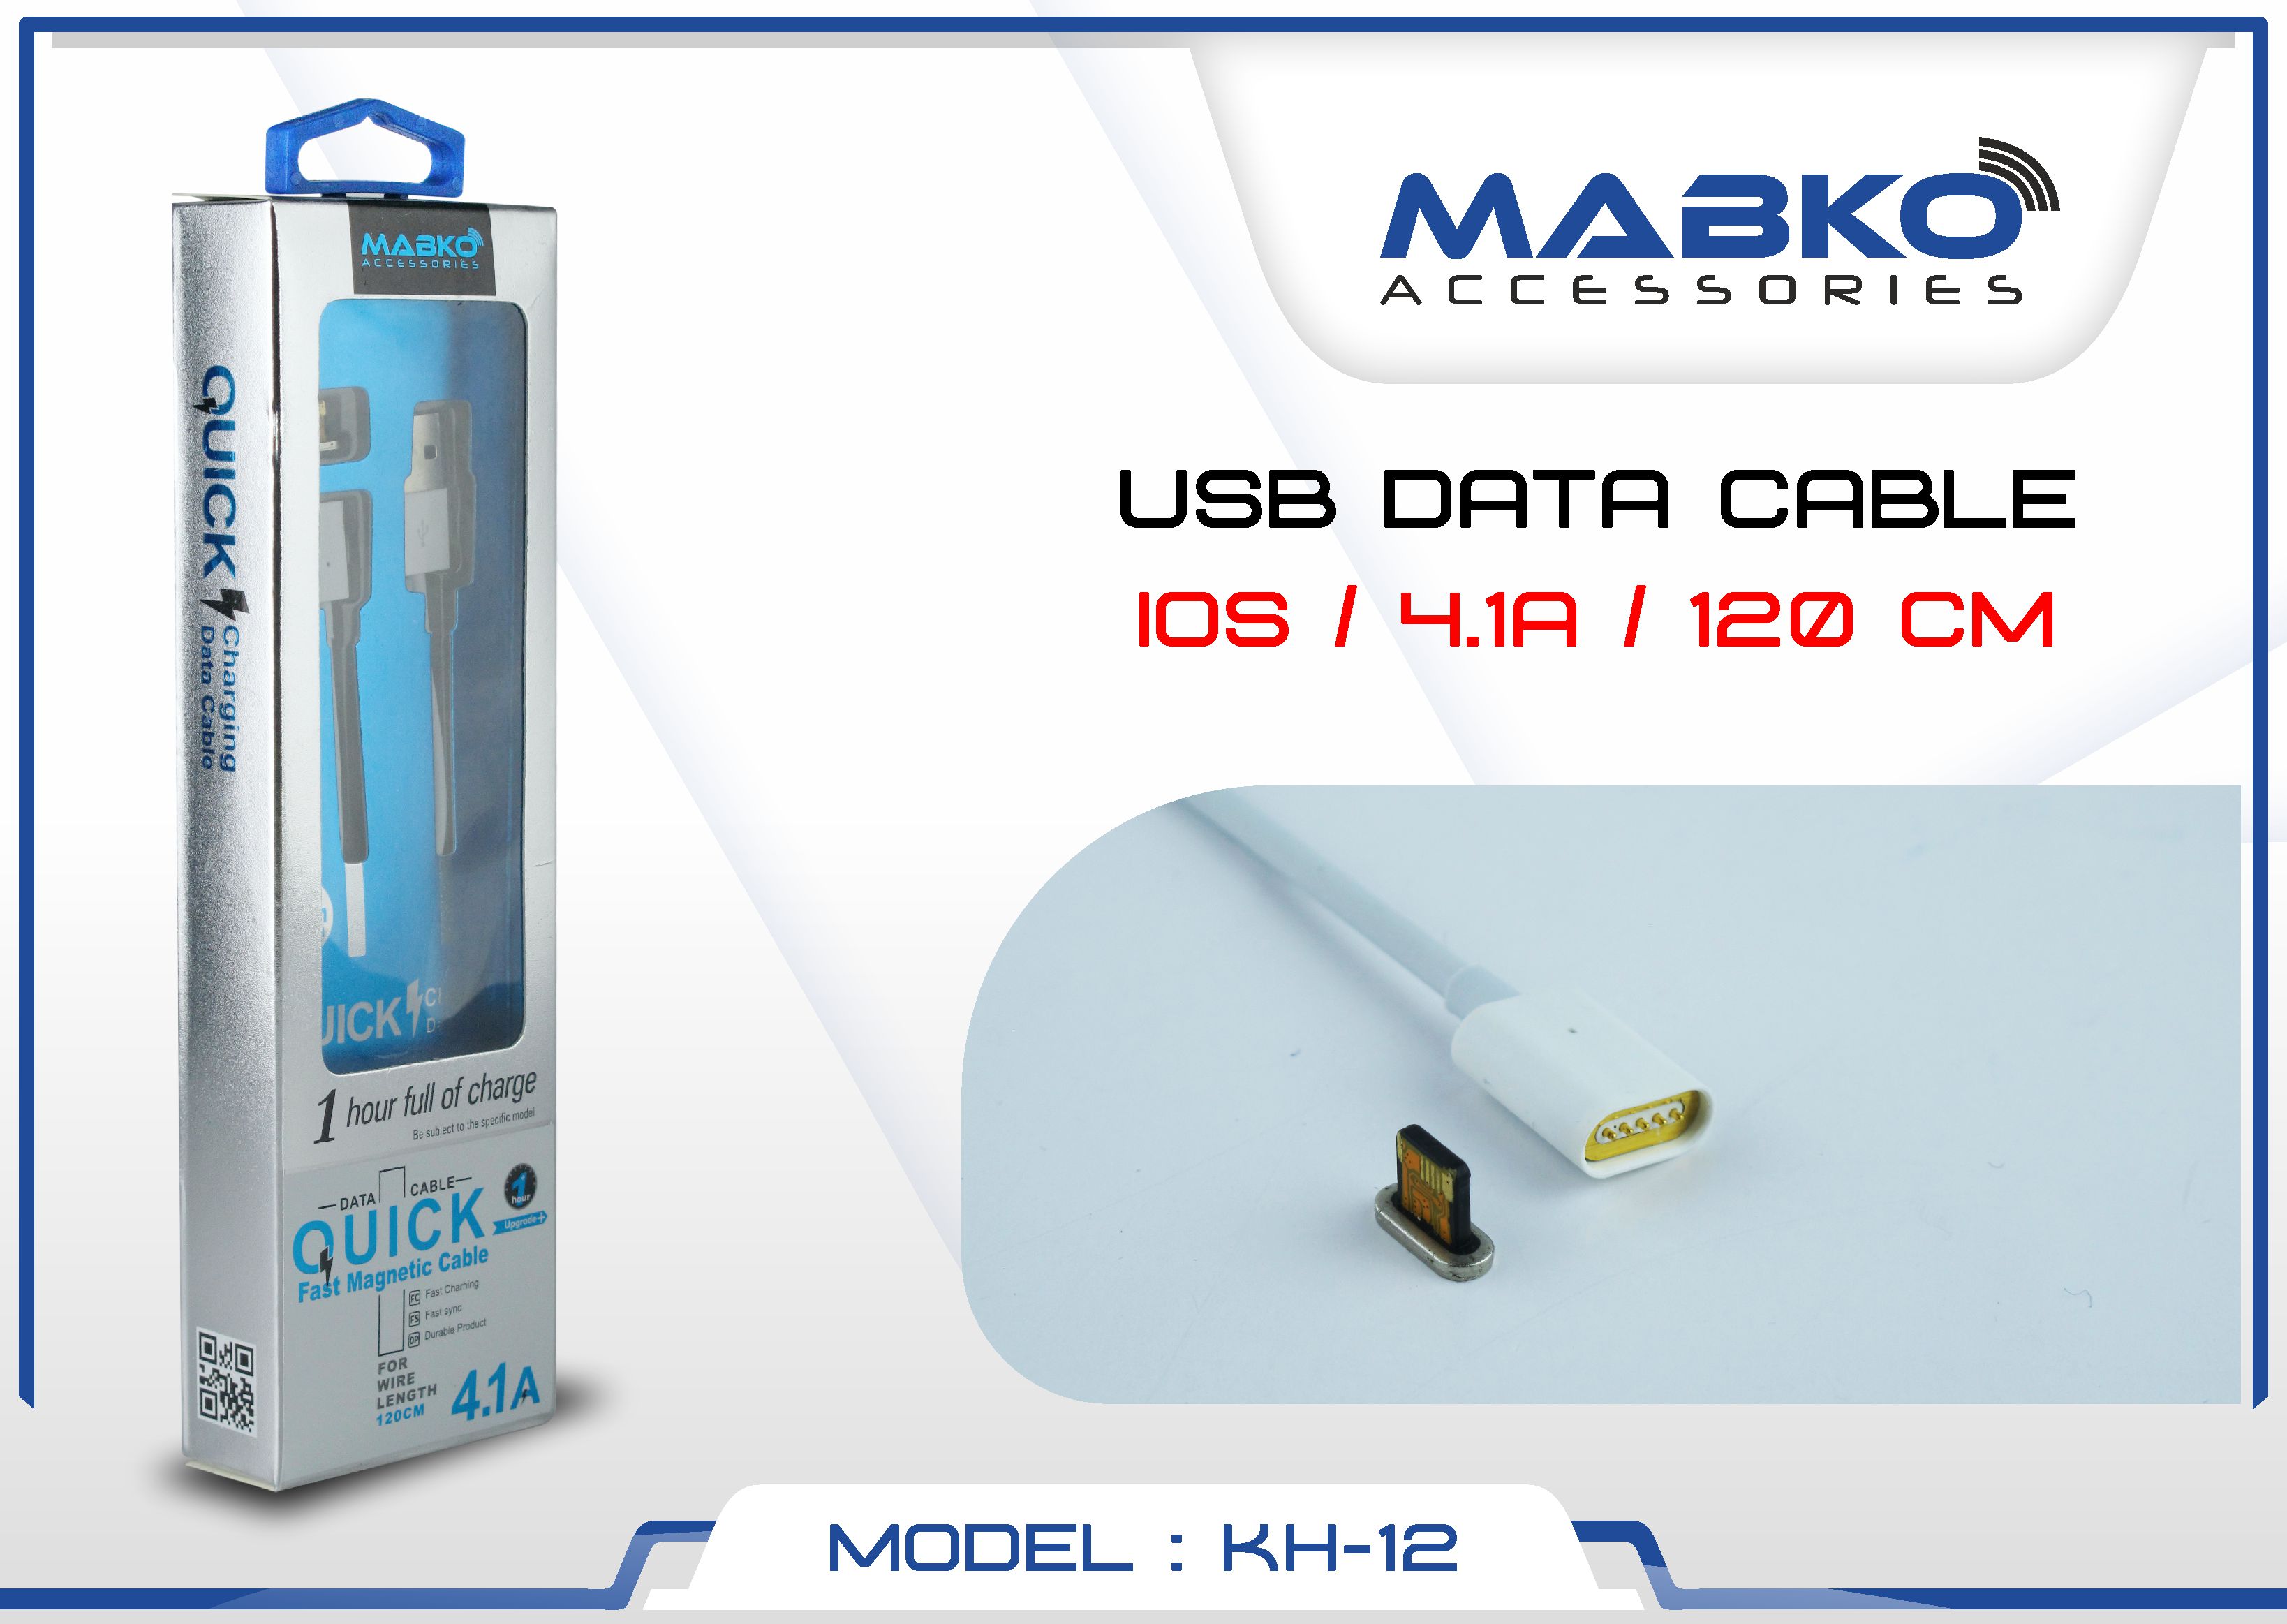 MABKO CABLE KH-C43